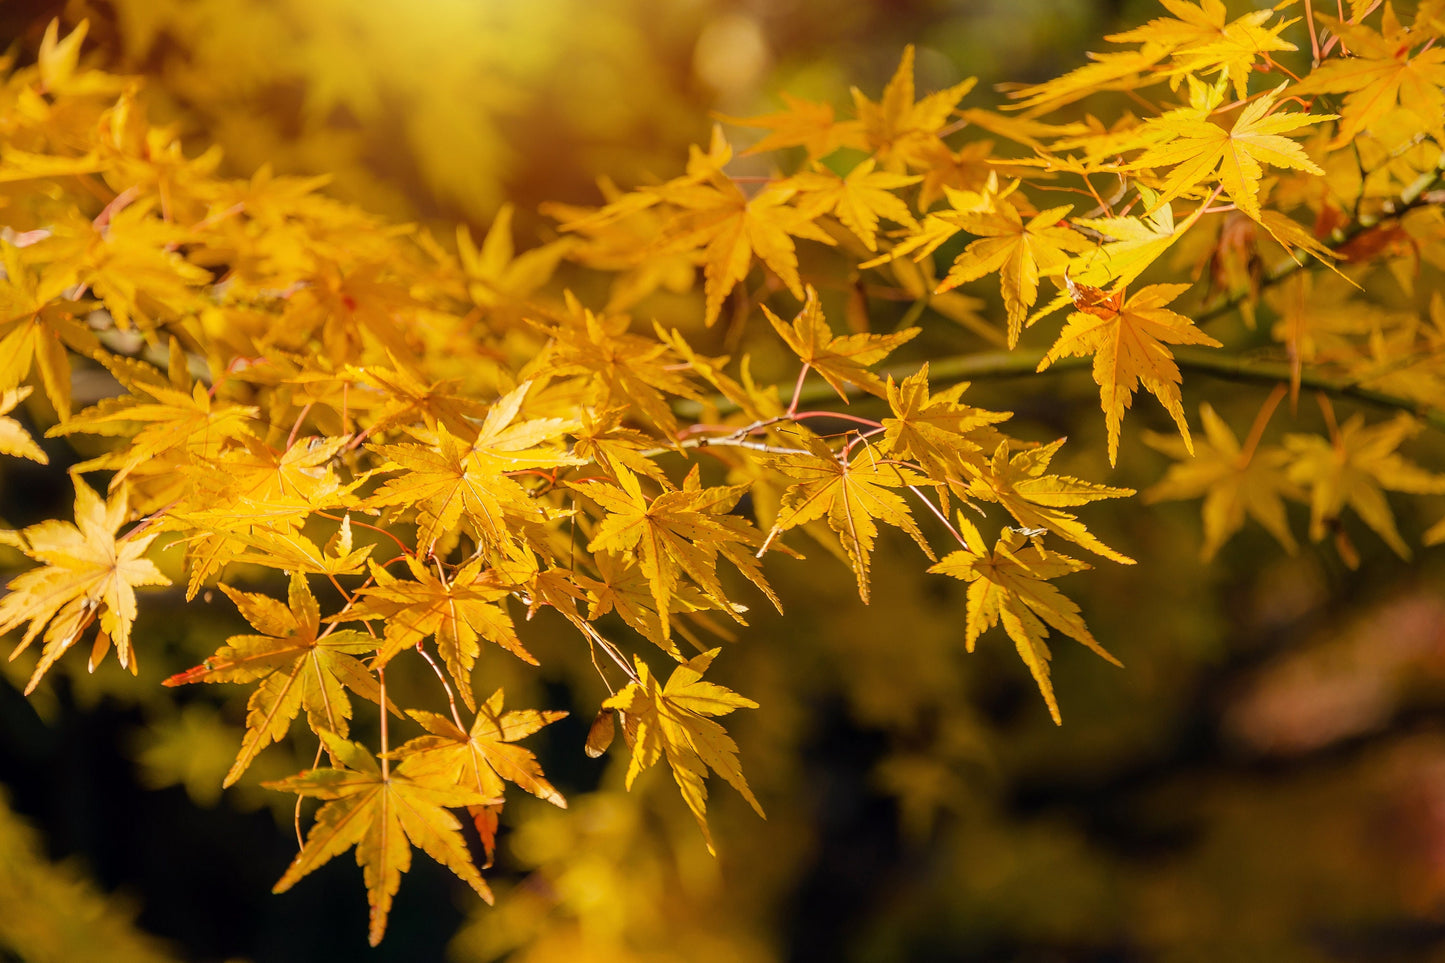 20 GREEN JAPANESE MAPLE Tree Ornamental Acer Palmatum Palmate Maple Yellow Fall Color Red Flower Seeds